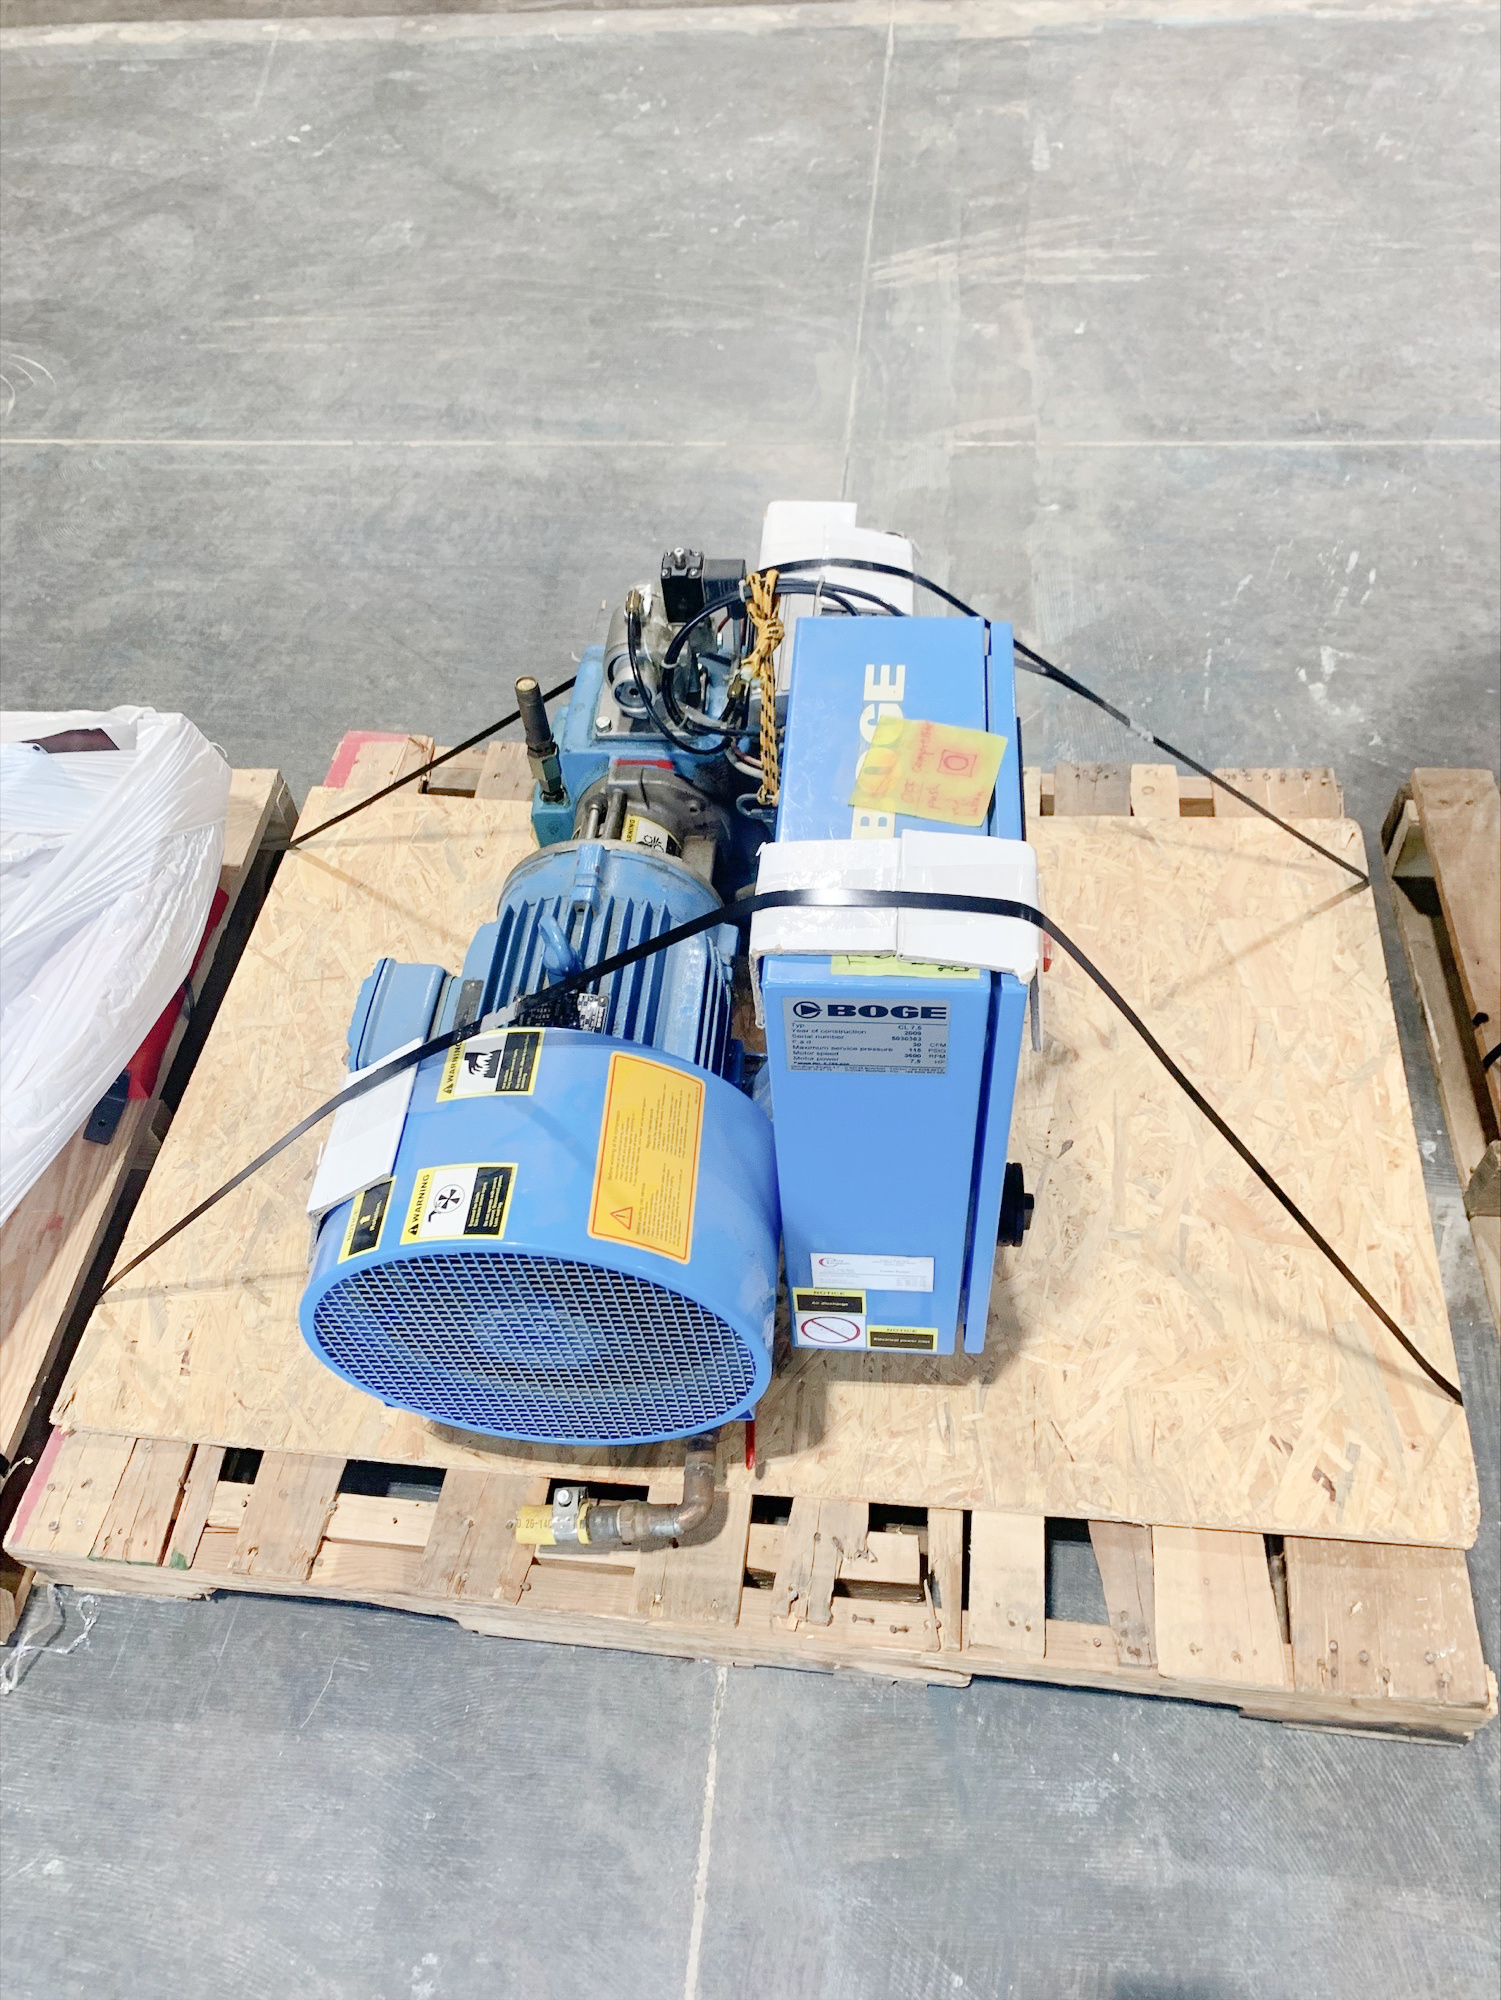 Picture Framing Equipment Lot: CTD D45X Double Miter Saw, ITW AMP VN4+MC Multi Channel Joiner,  Cassese CS299MXL2, & Boge Air Compressor (Used) Item # UE-080422B (Minnesota)